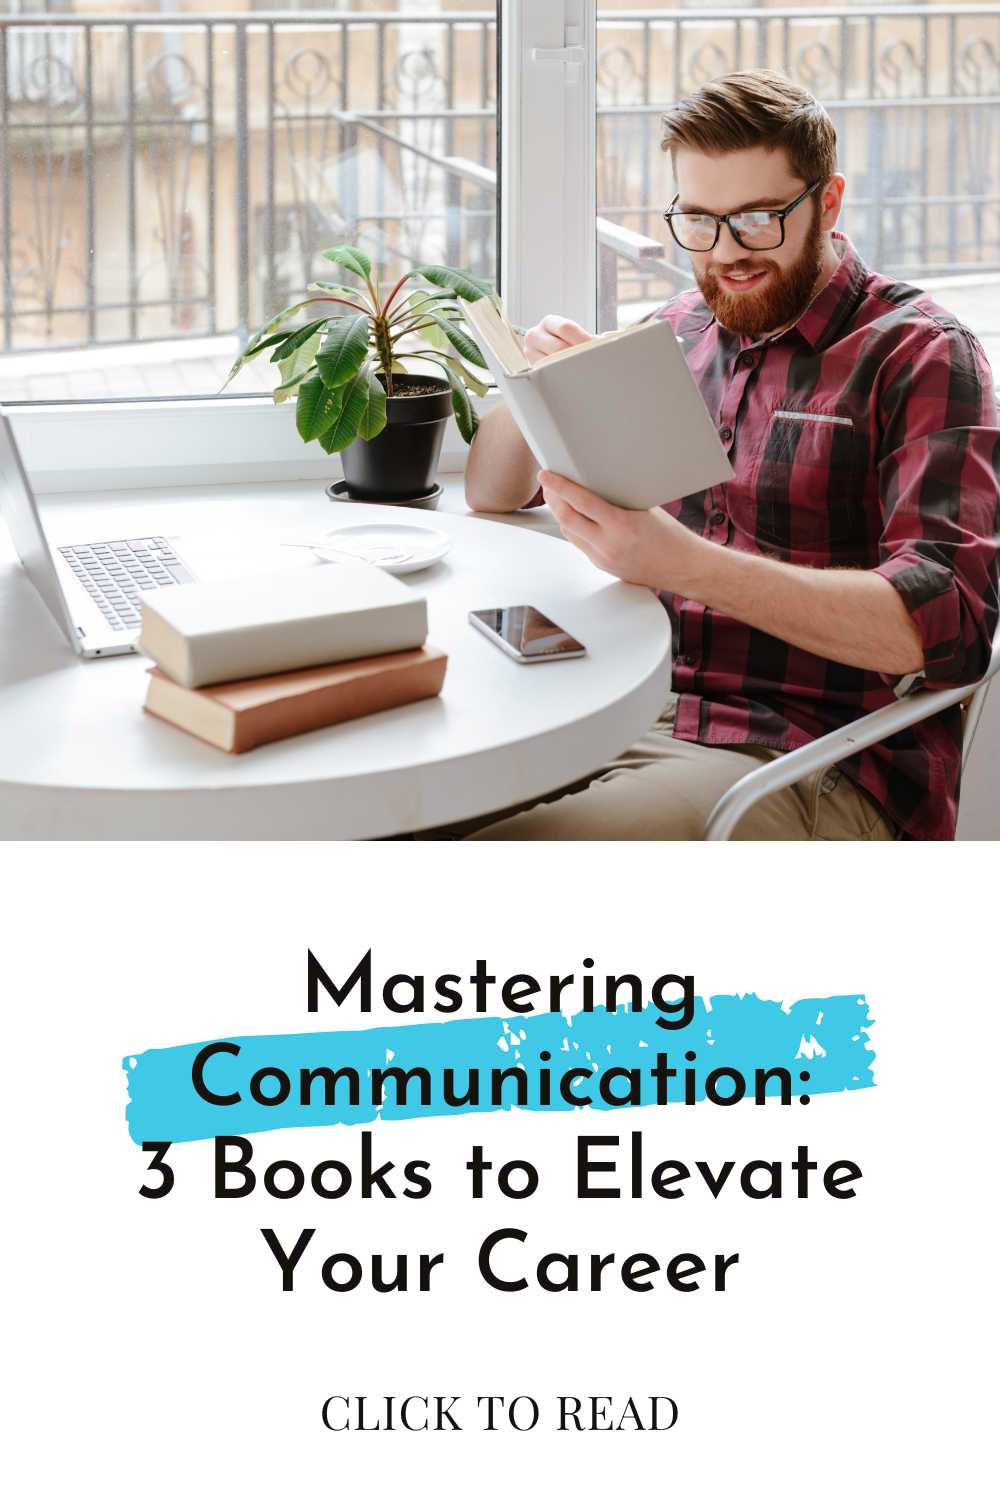 Book Recommendations to Help You Develop Communication Skills | Find a job | Resume Templates | Job Interview Advice